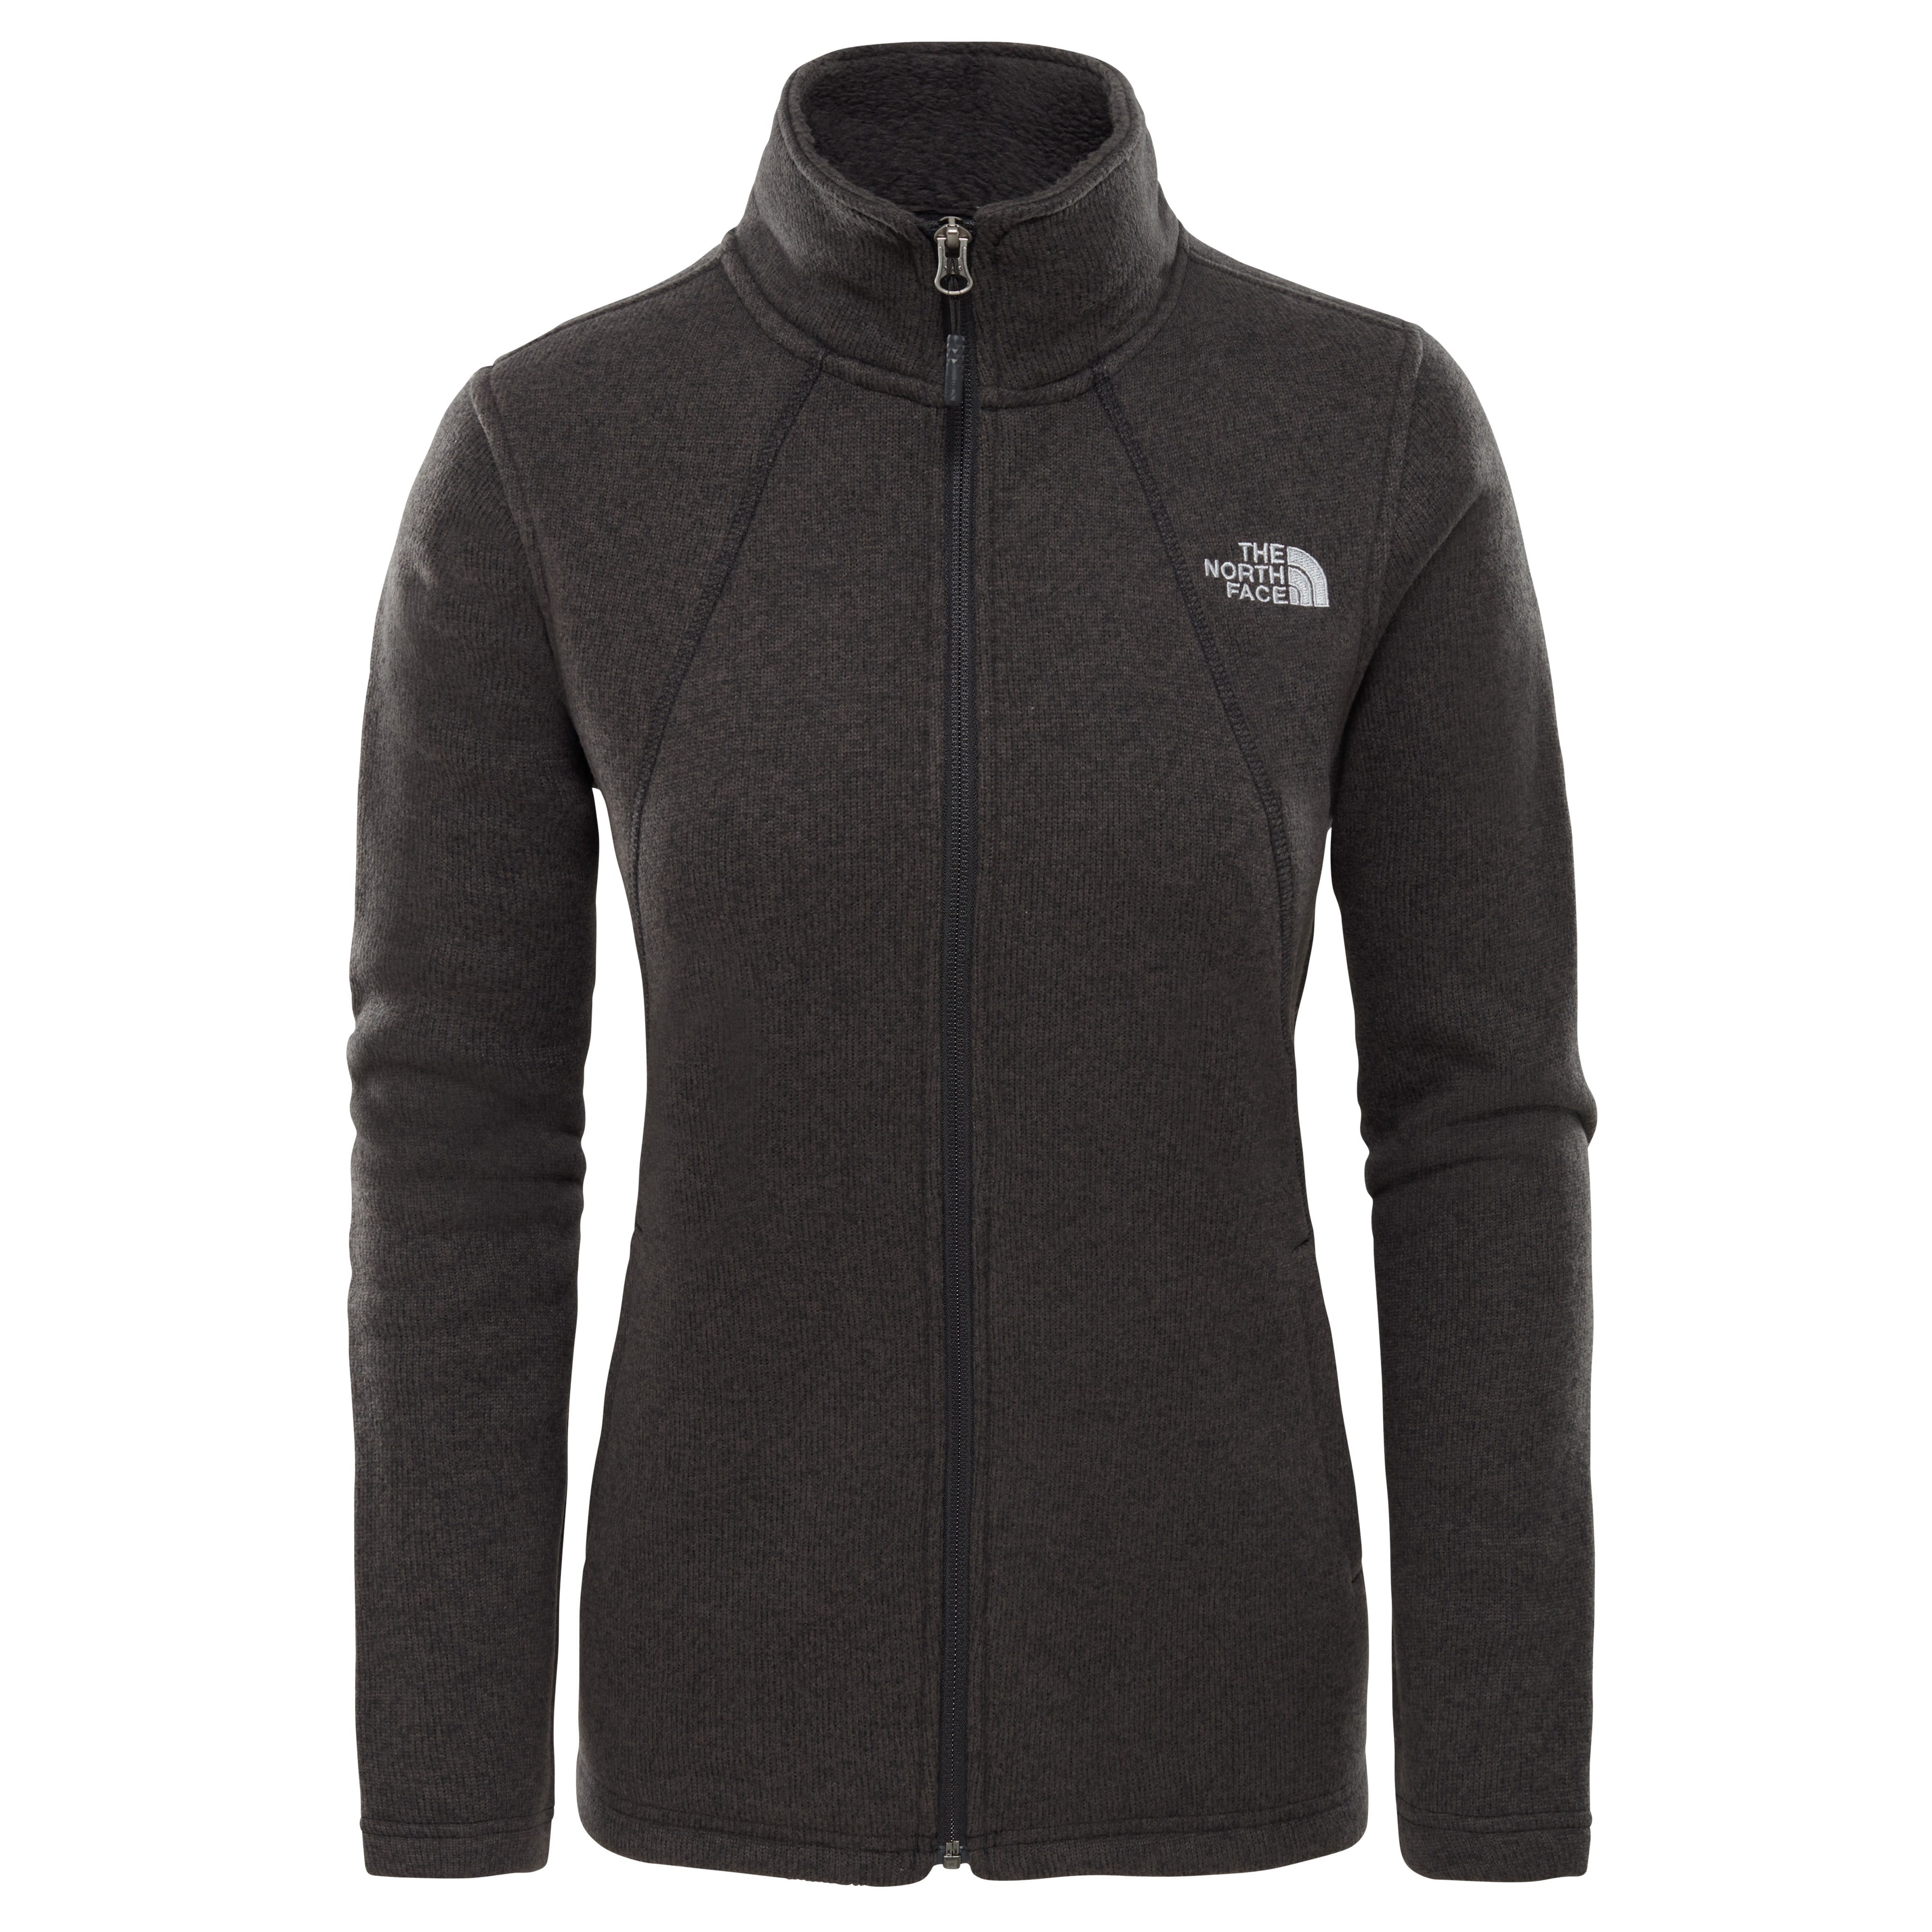 Buy The North Face Women's Crescent Full Zip from Outnorth